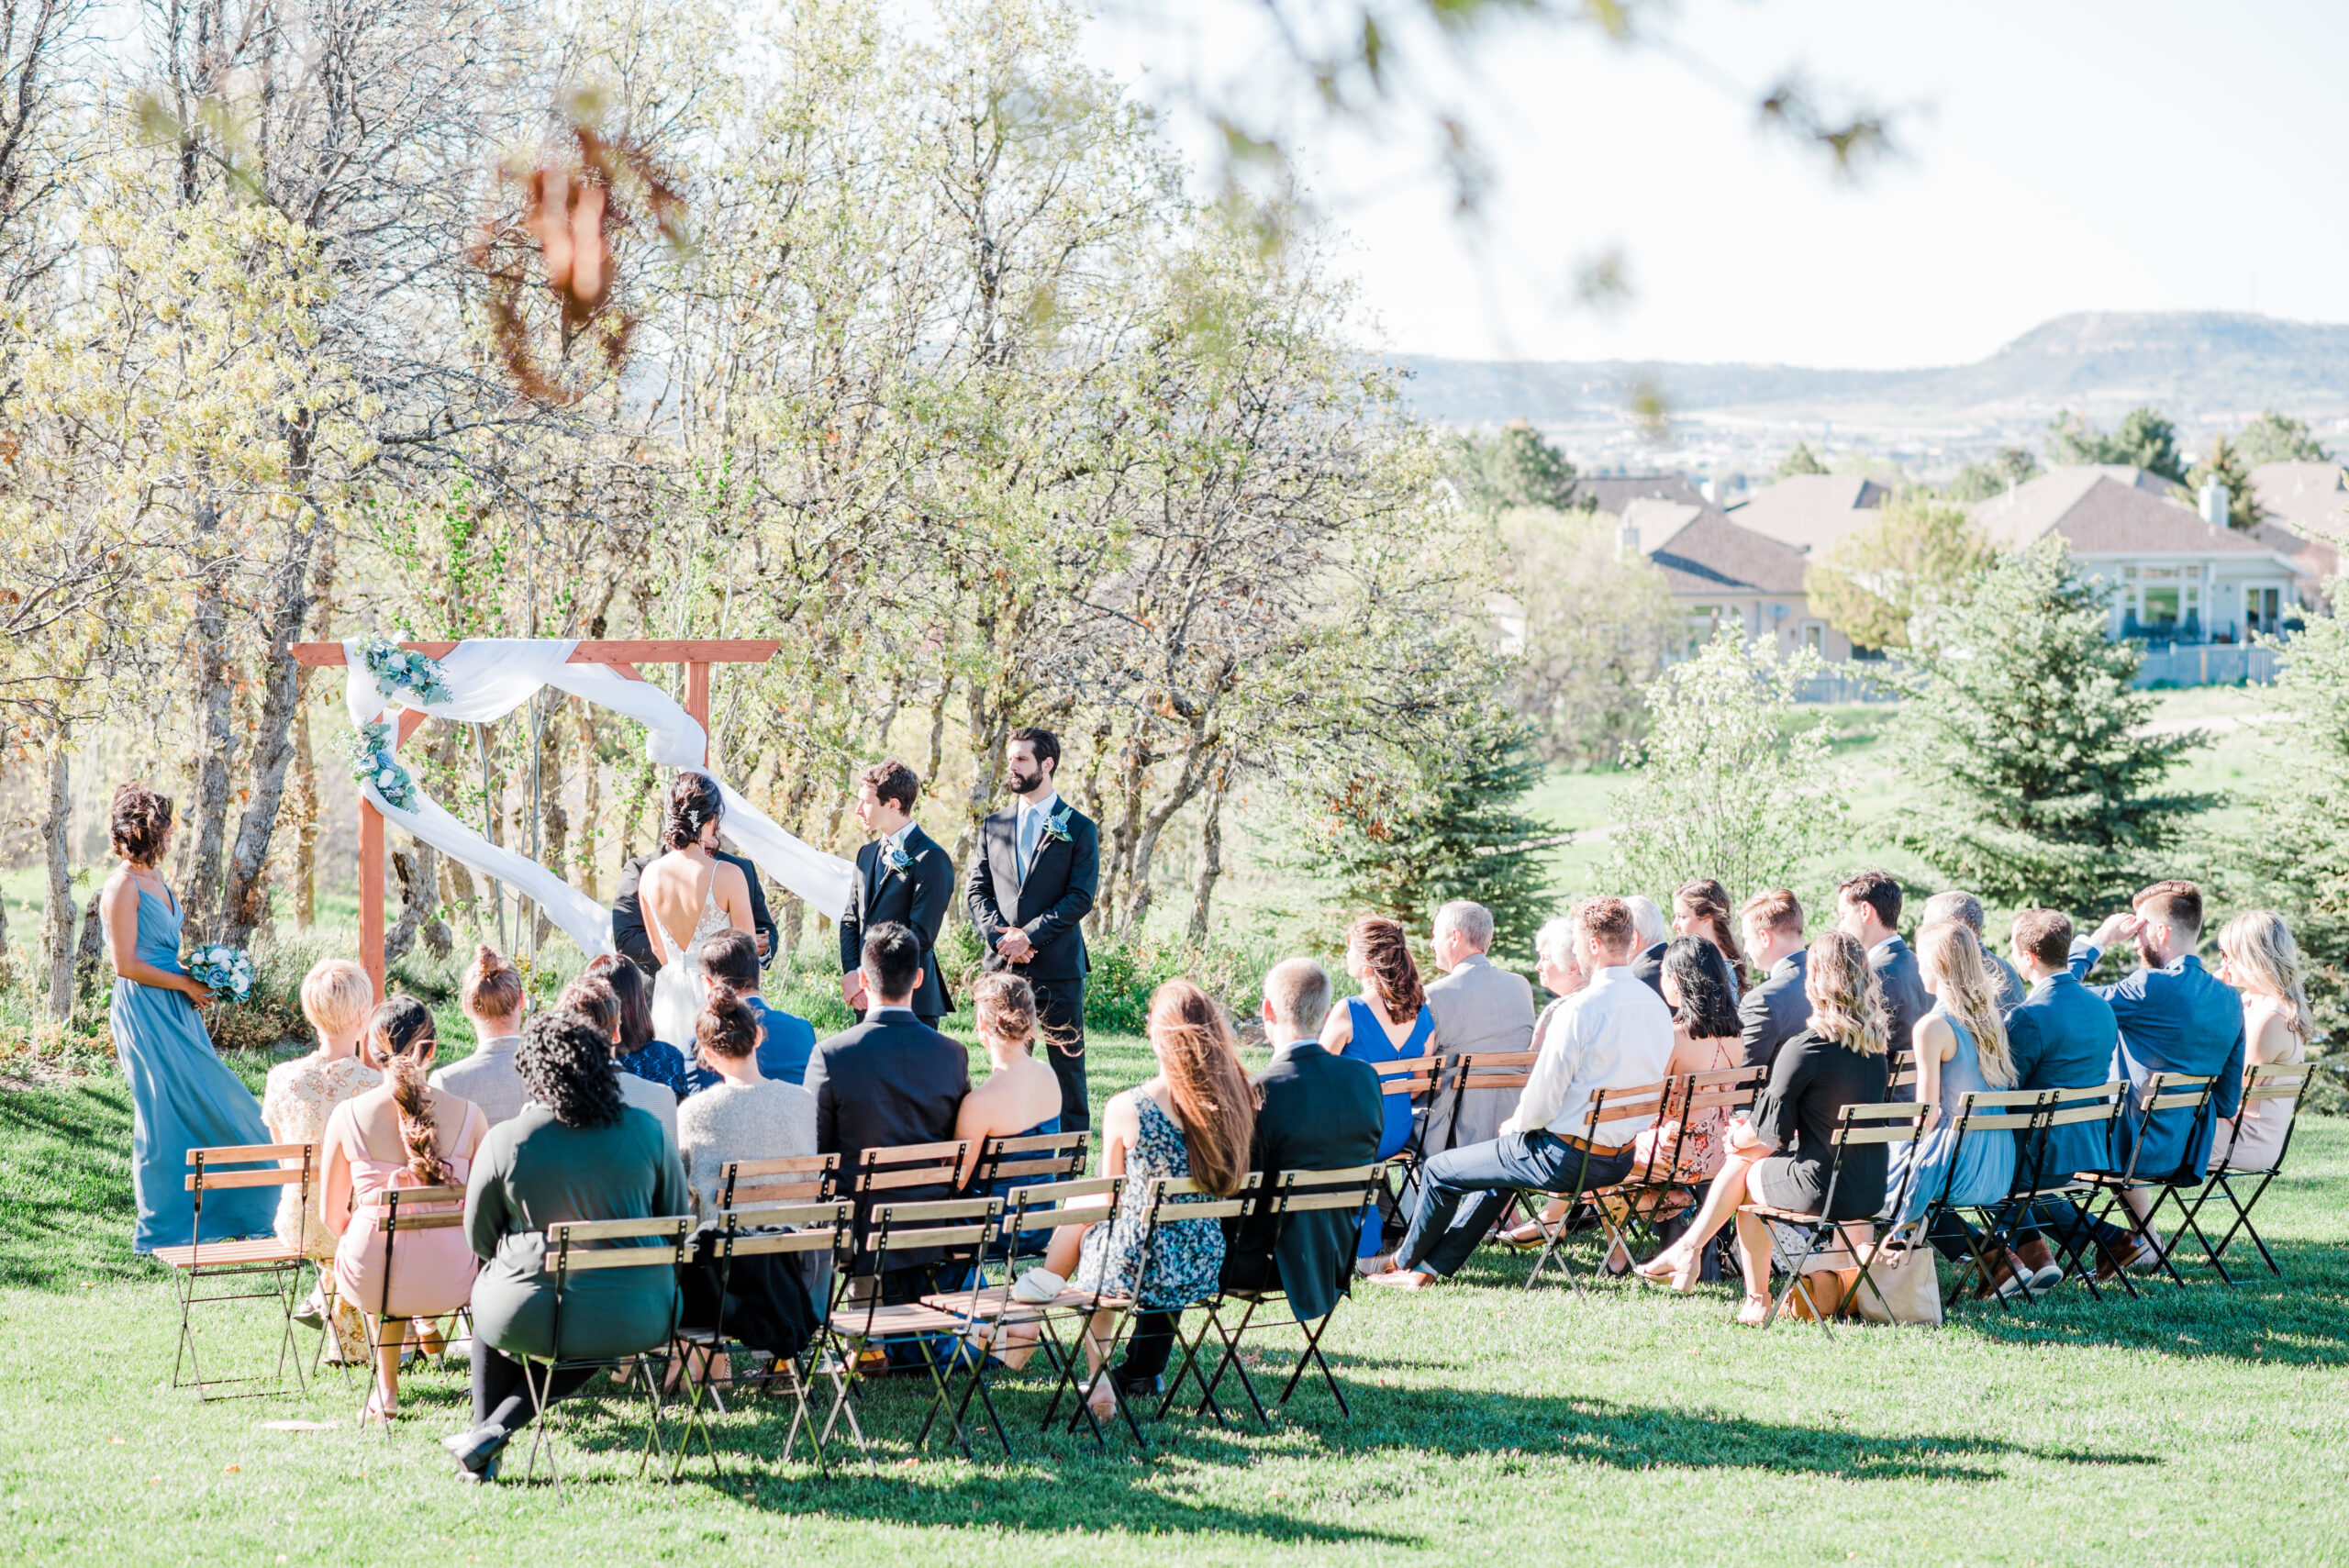 Guests sit and watch an outdoor ceremony at The Oaks along the scrub trees while bride and groom exchange vows